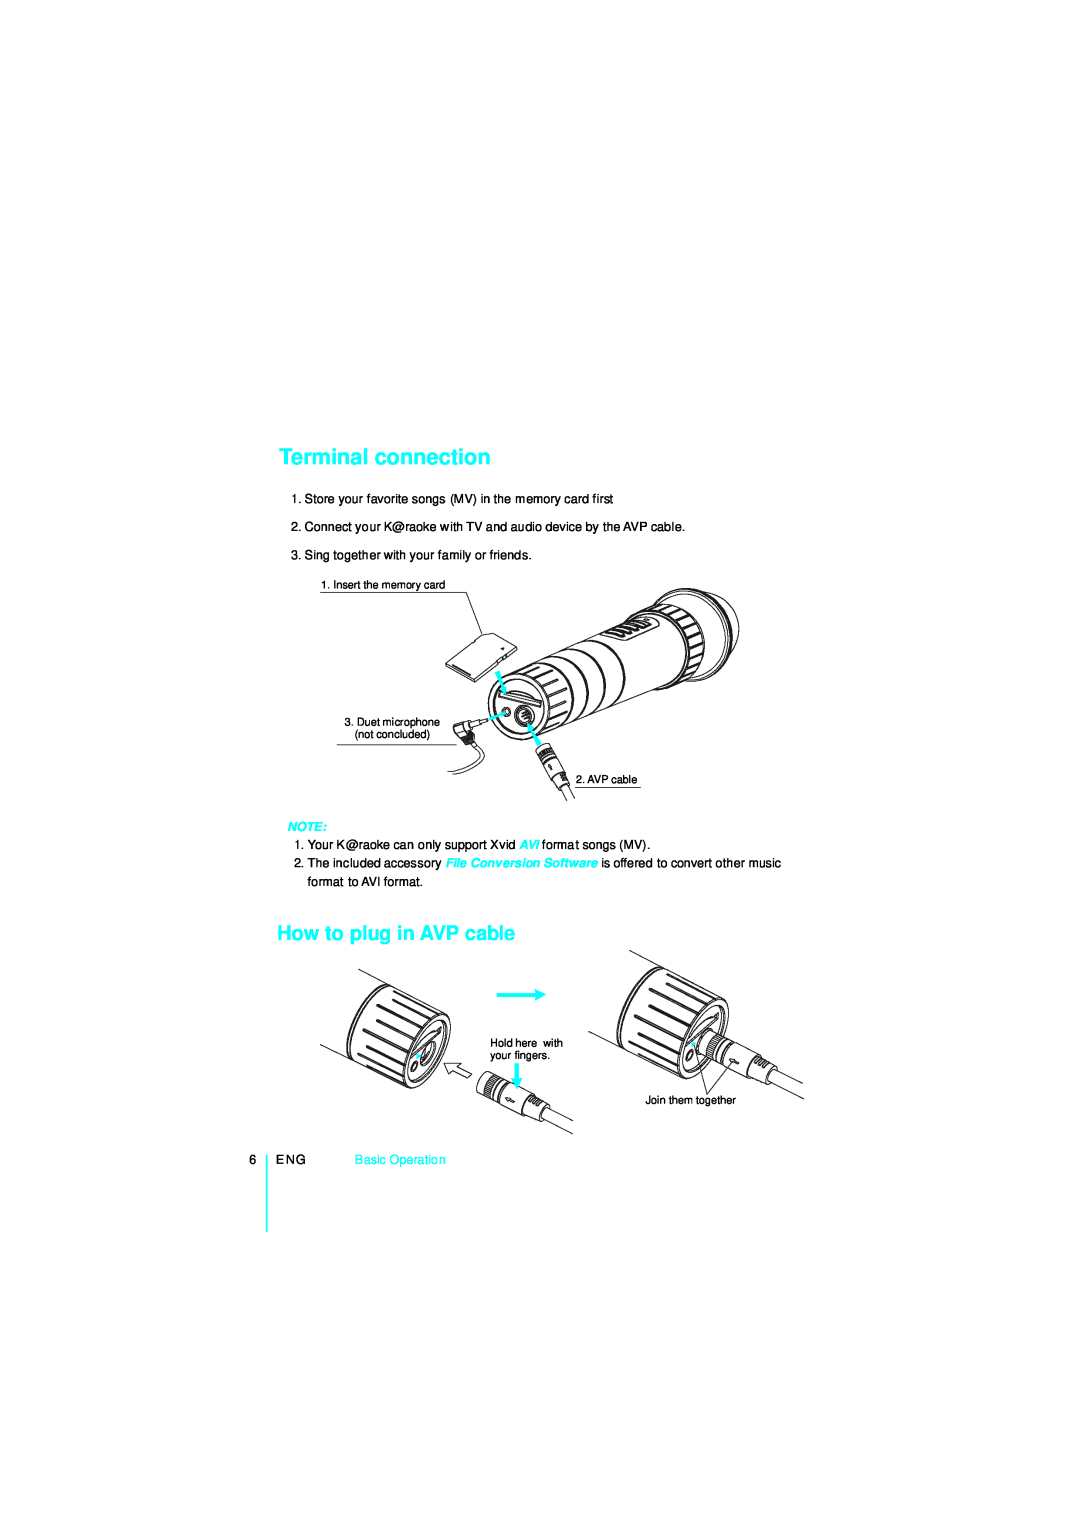 NextBase Microphone manual How to plug in AVP cable, Terminal connection, Basic Operation 